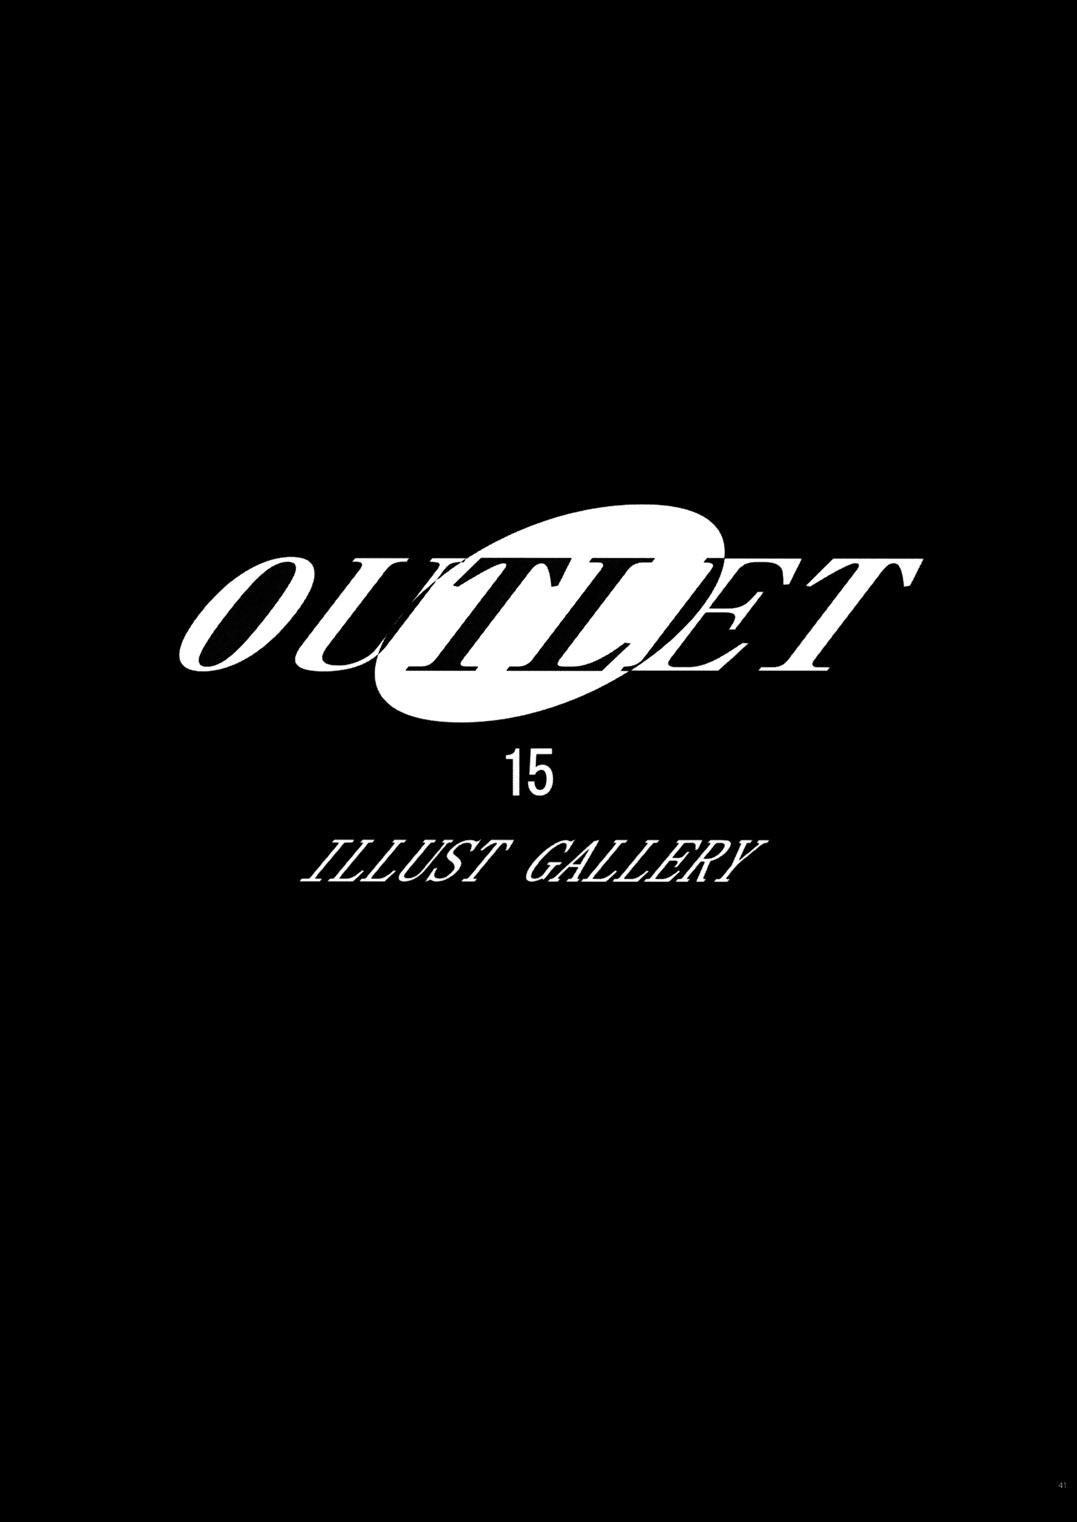 OUTLET 15 39